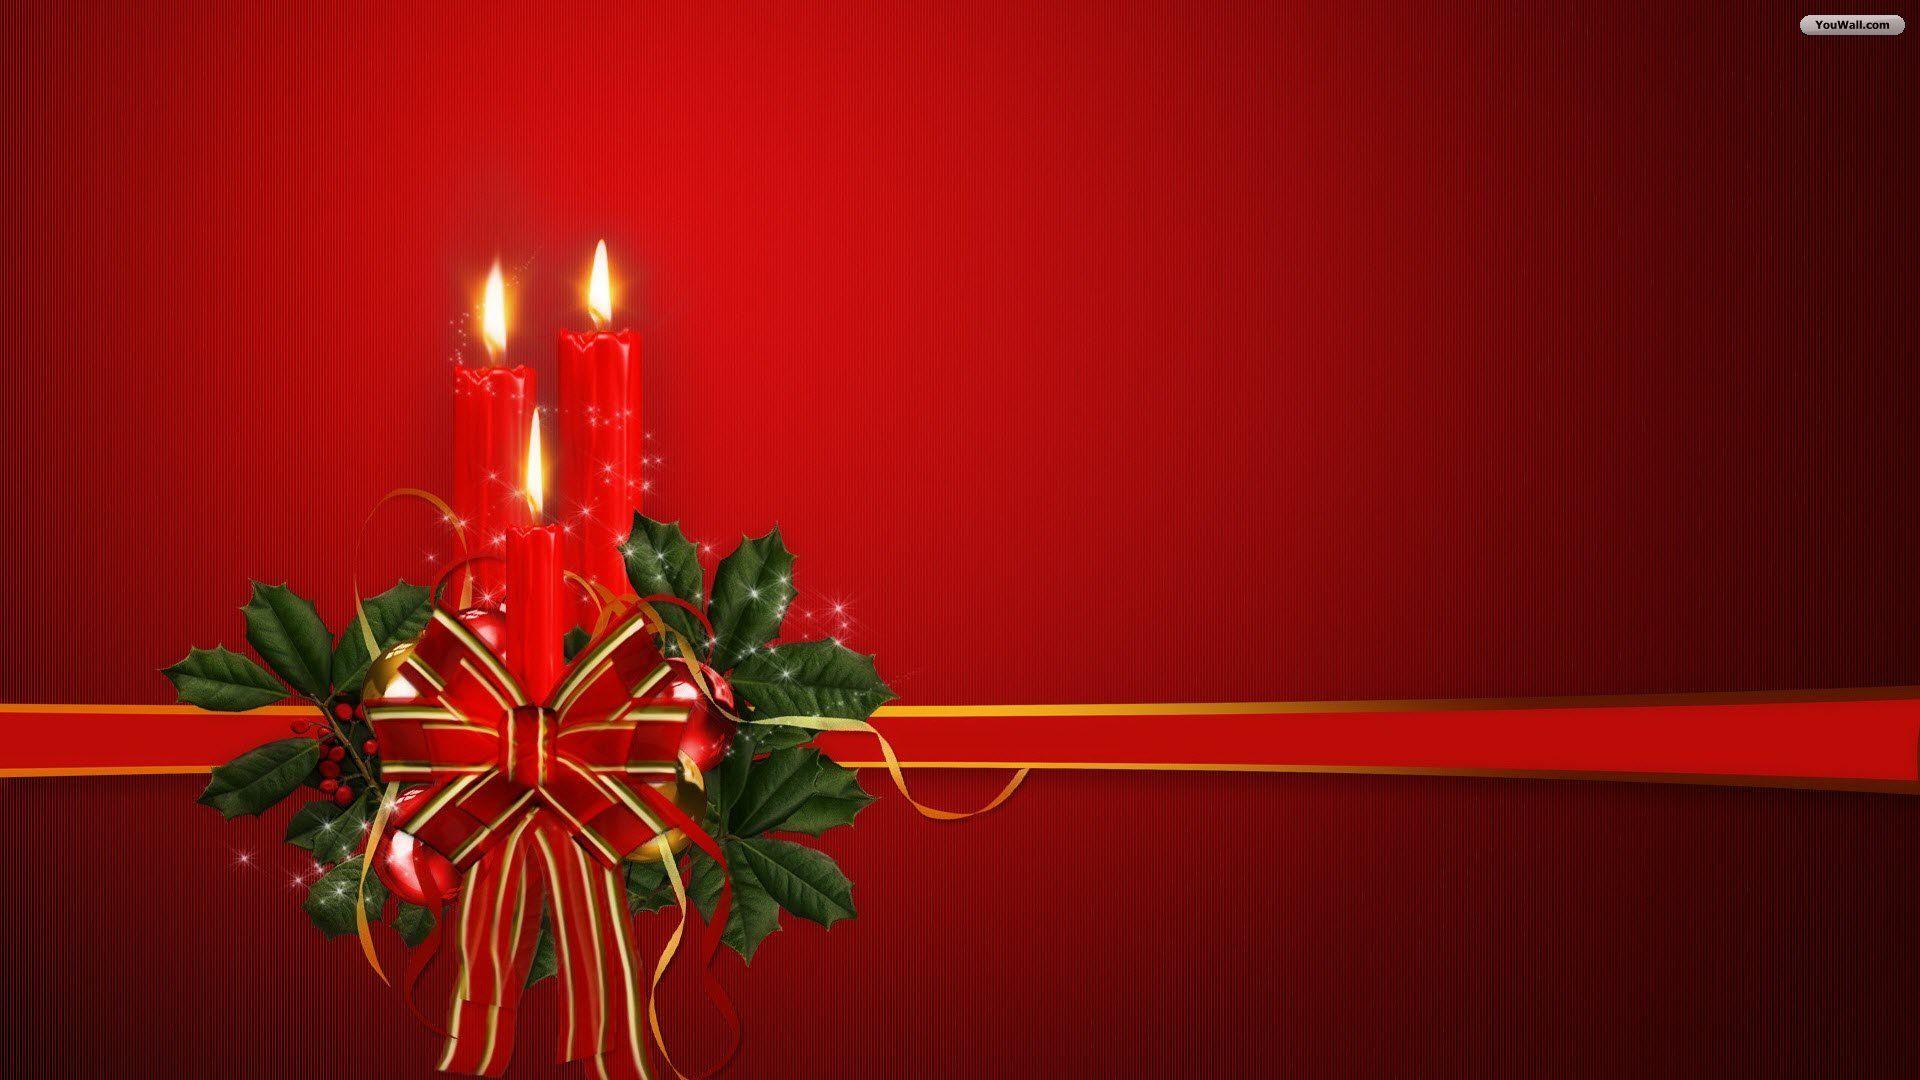 Christmas Candles, Picture, Image, Pics, Photo